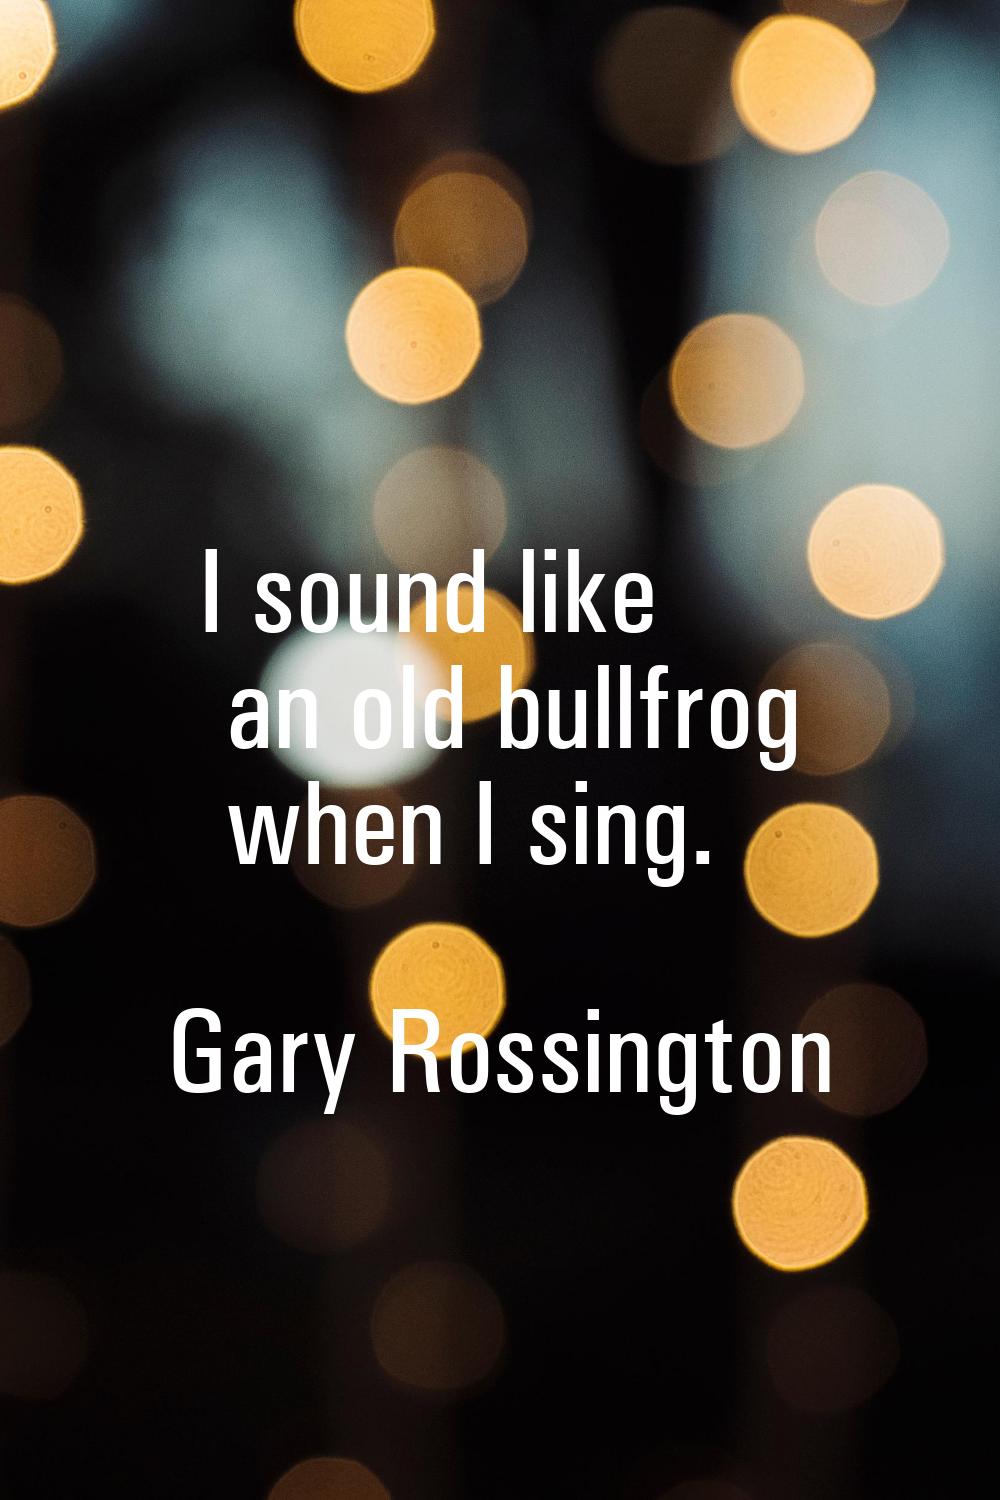 I sound like an old bullfrog when I sing.